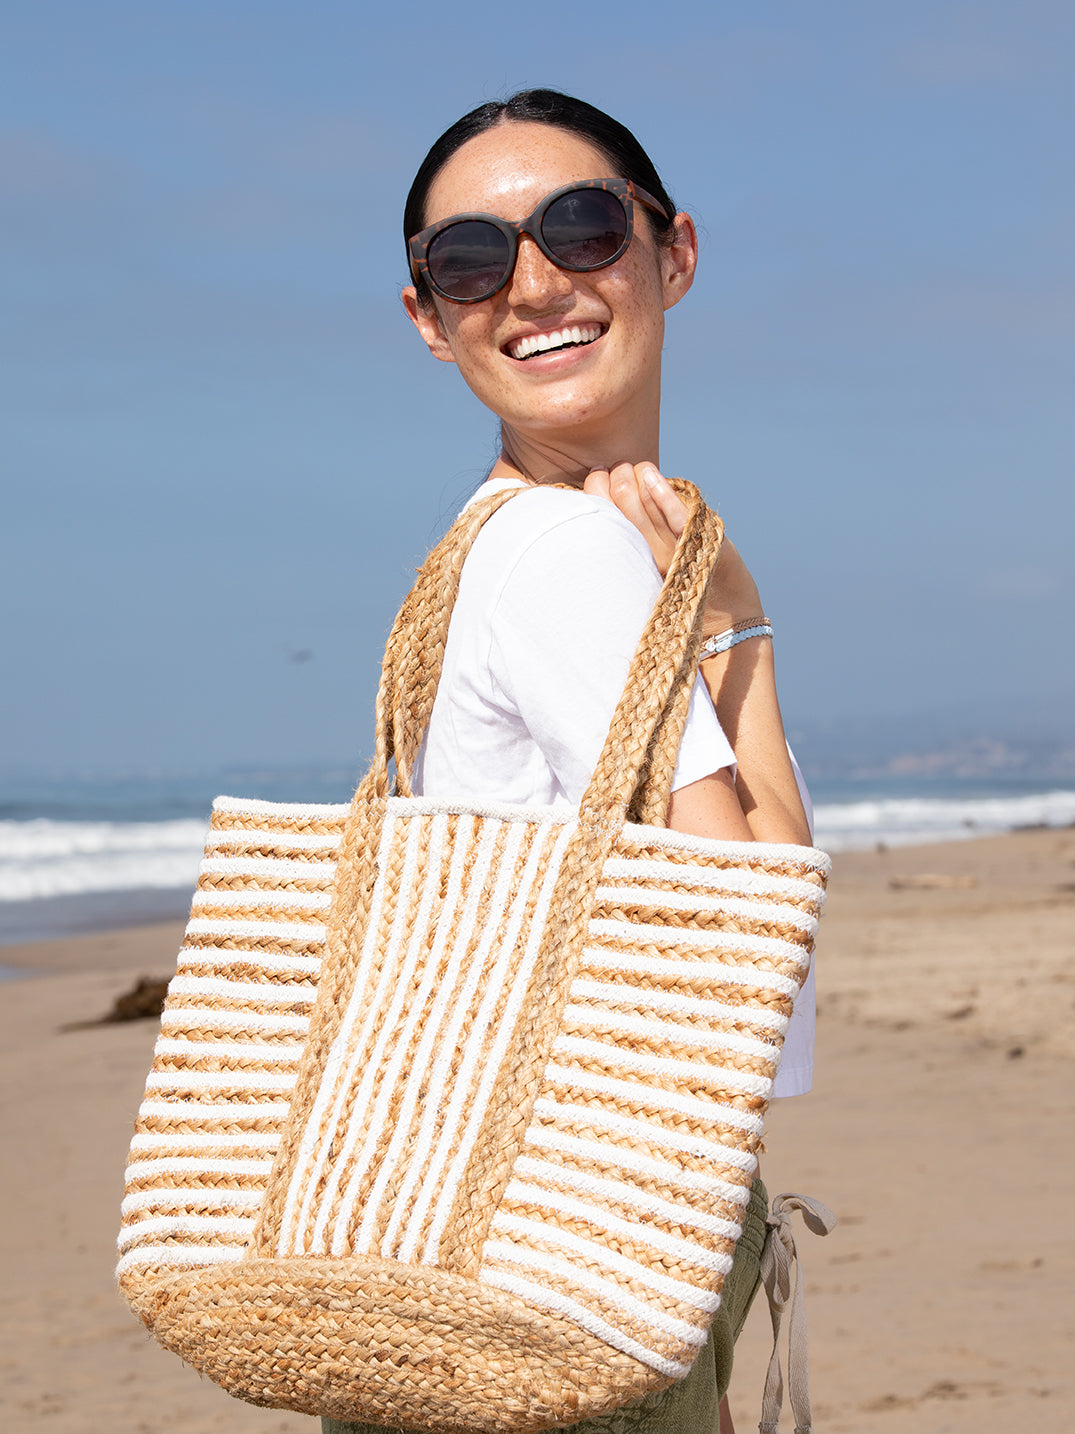 RECYCLED WHITE STRIPED BRAIDED JUTE BEACH ECO-TOTE